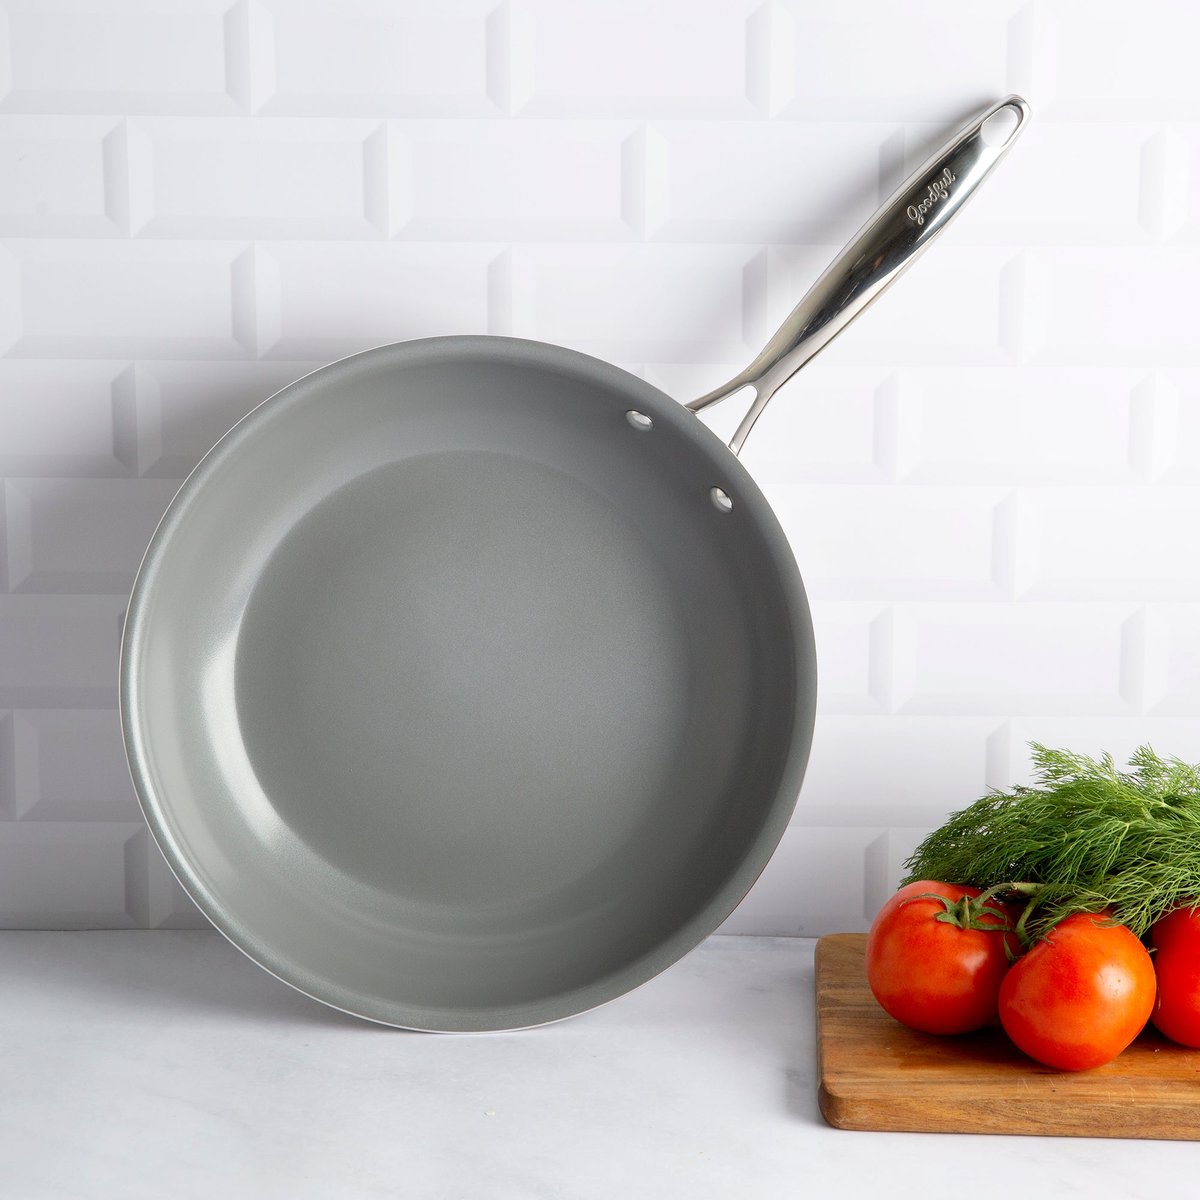 https://images.verishop.com/goodful-kitchen-goodful-11-inch-ceramic-nonstick-frying-pan-dishwasher-safe-skillet-with-comfort-grip-stainless-steel-handle-pfoa-free-cream/M00741393480047-56617717?auto=format&cs=strip&fit=max&w=1200